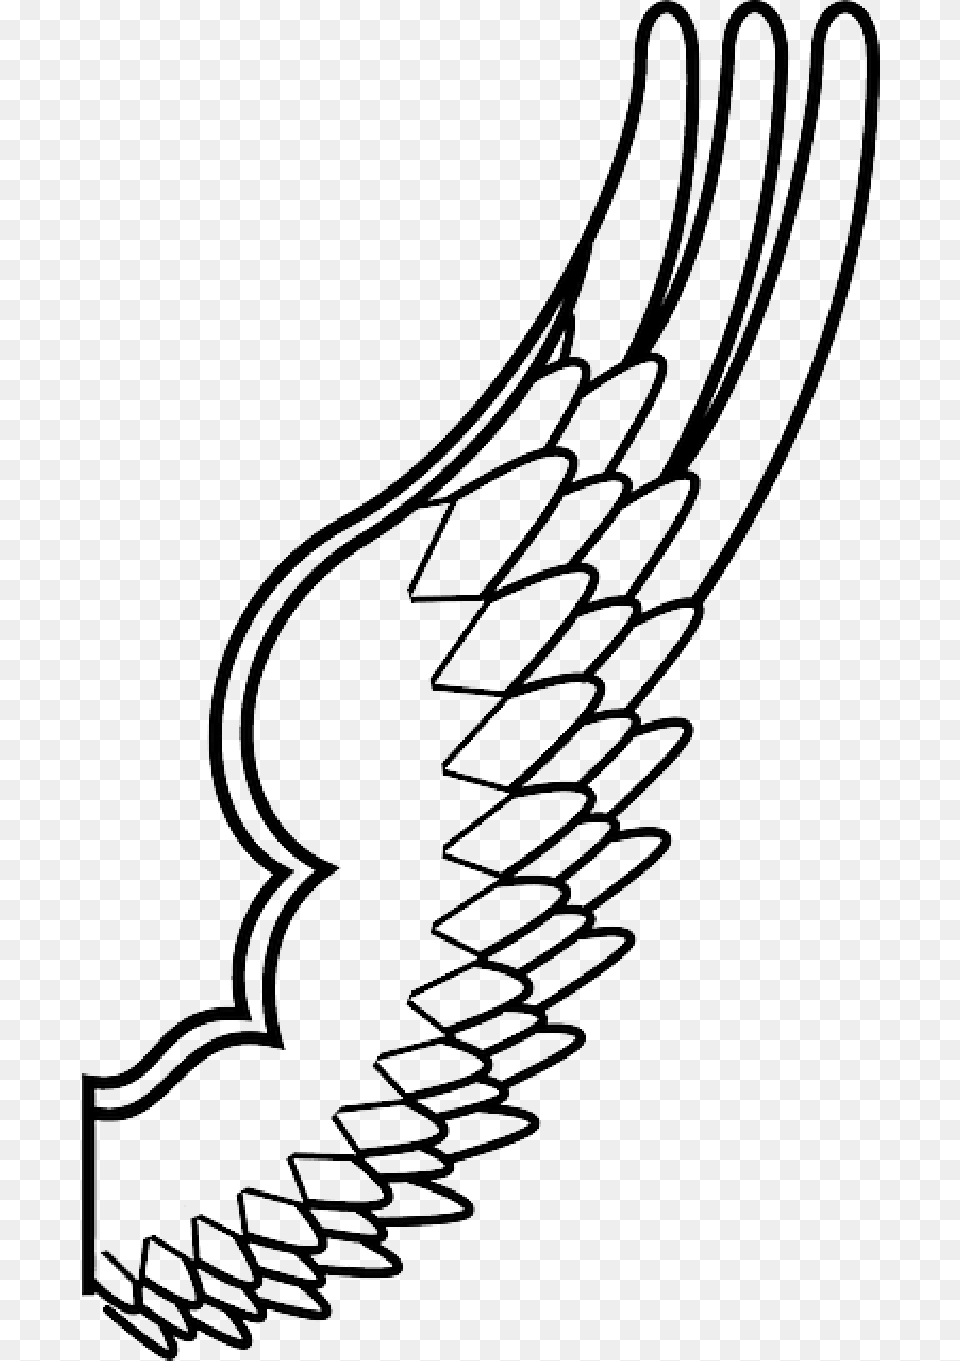 Spread Drawing Design Angel Wing Feathers Wing Outline, Cutlery, Fork, Smoke Pipe, Animal Free Png Download